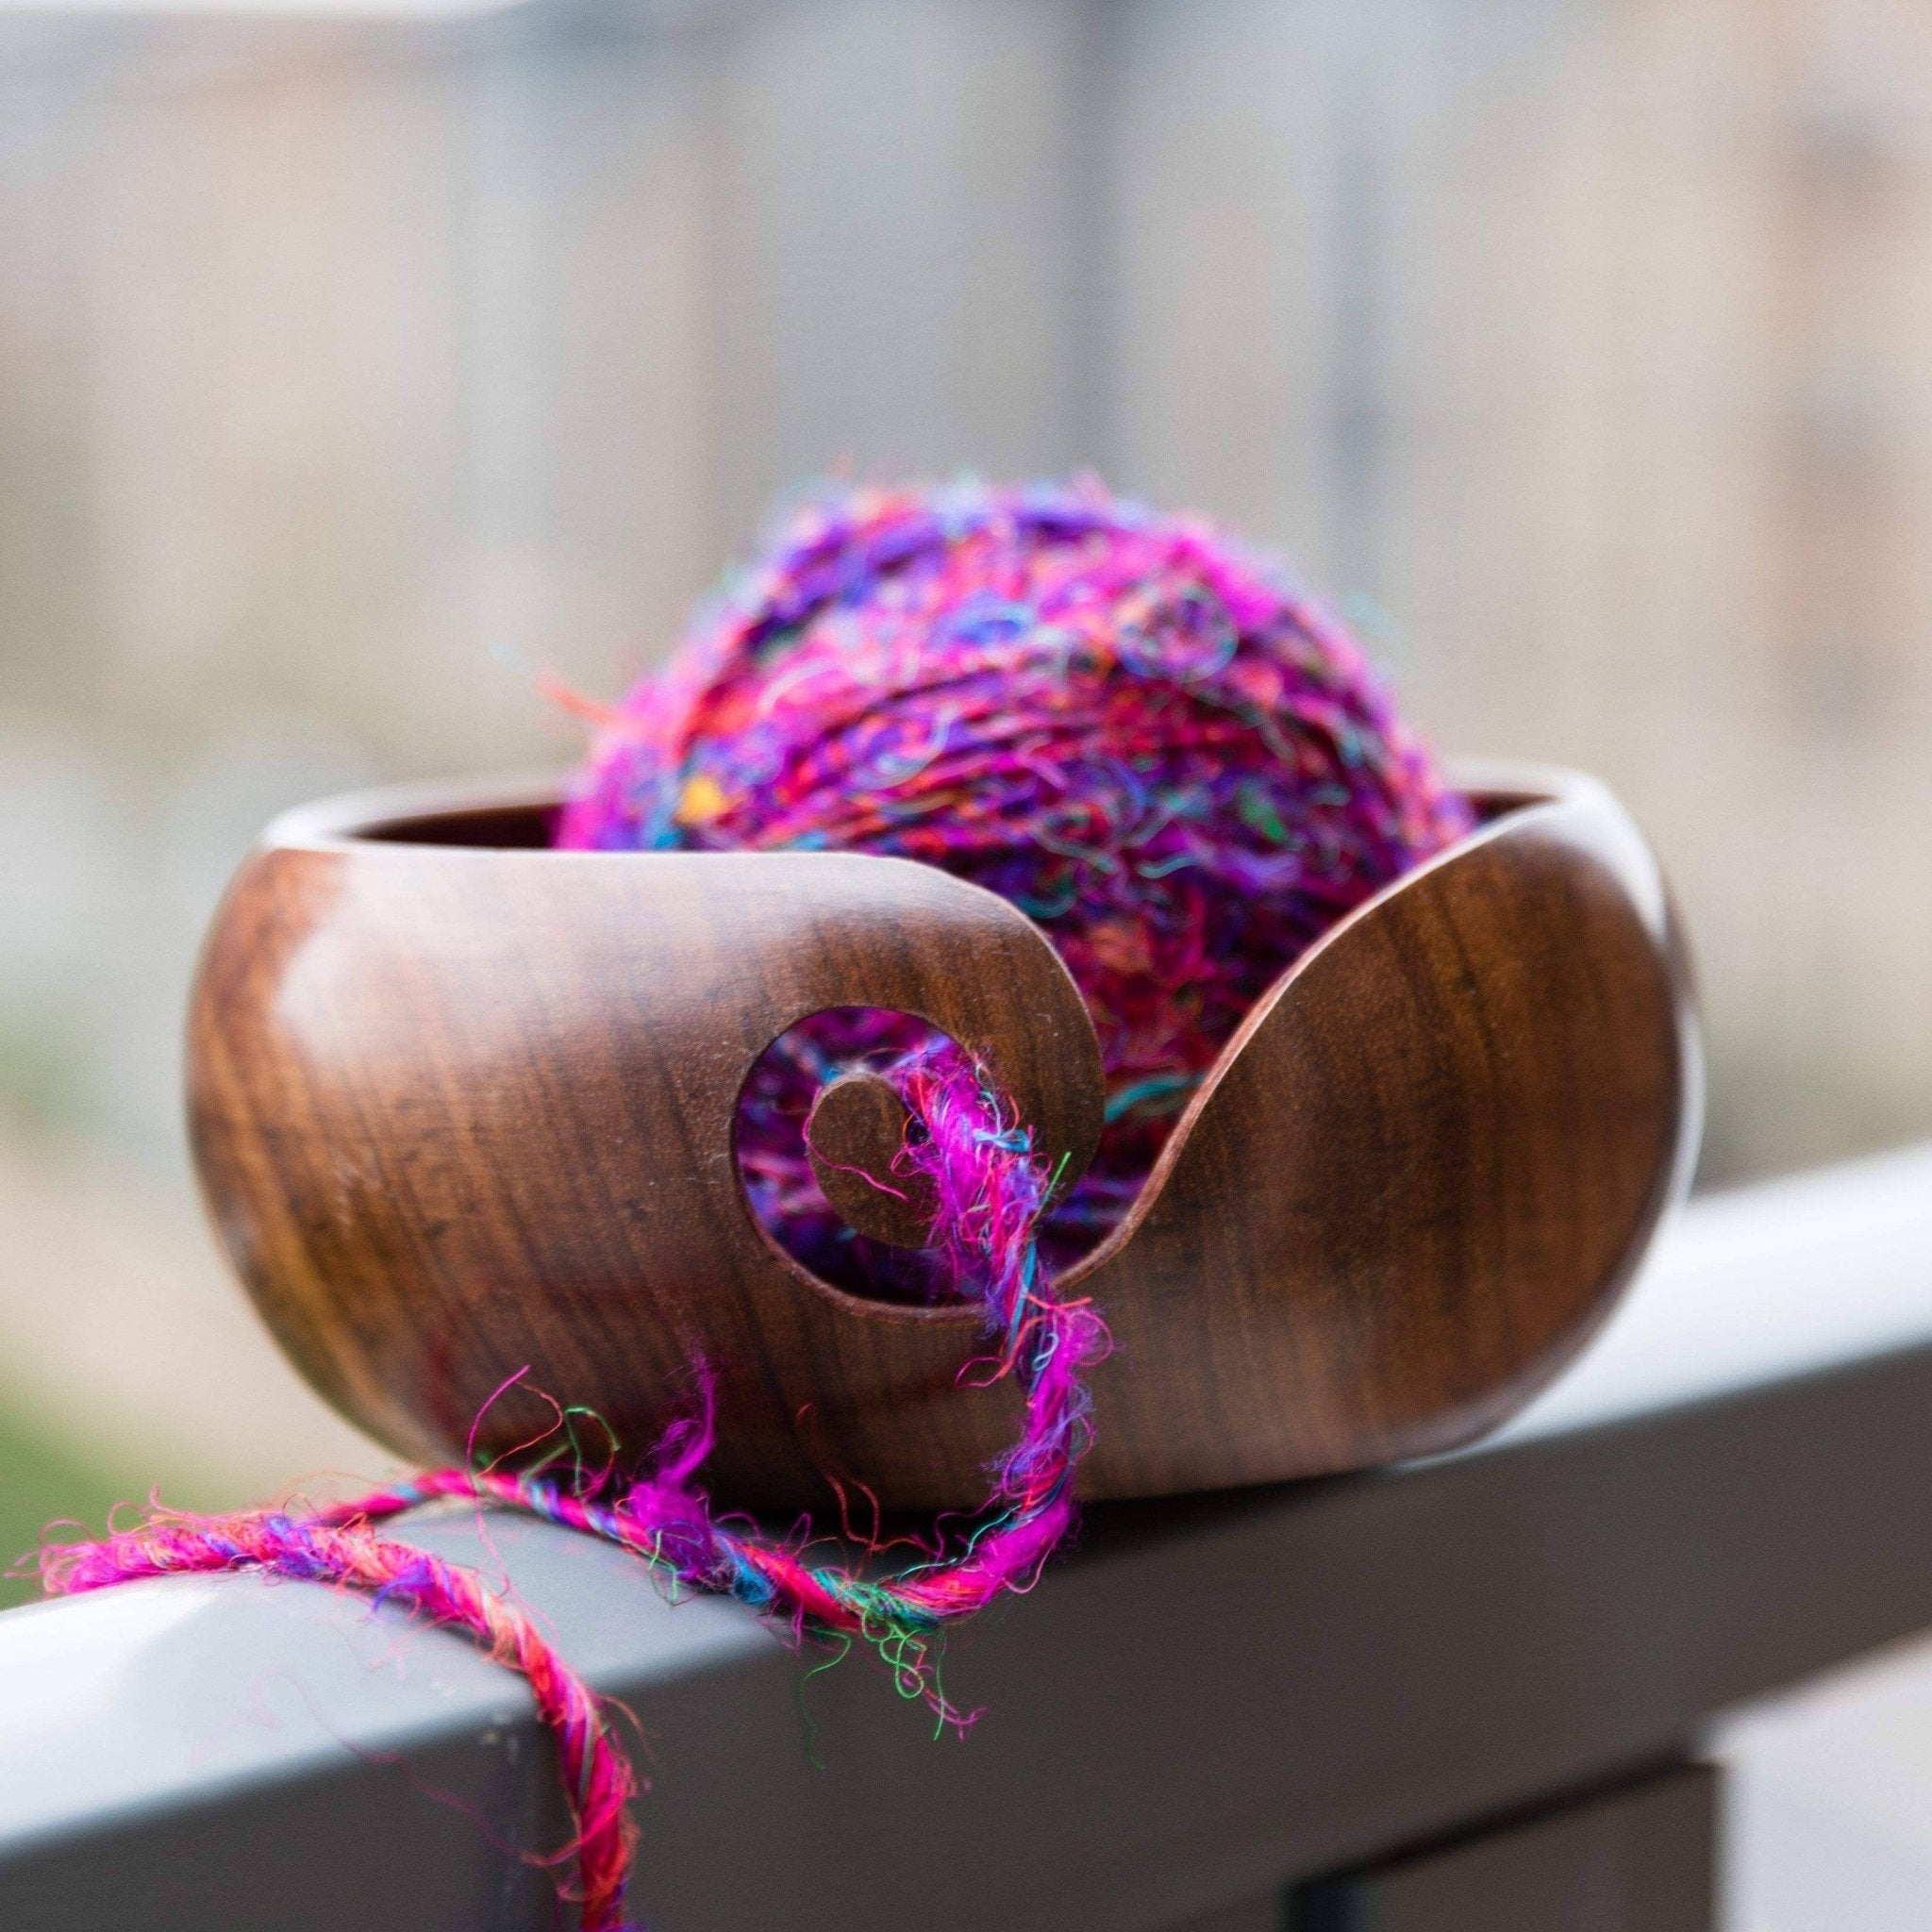 Top 10 Most Popular Gifts for Crafters - Darn Good Yarn